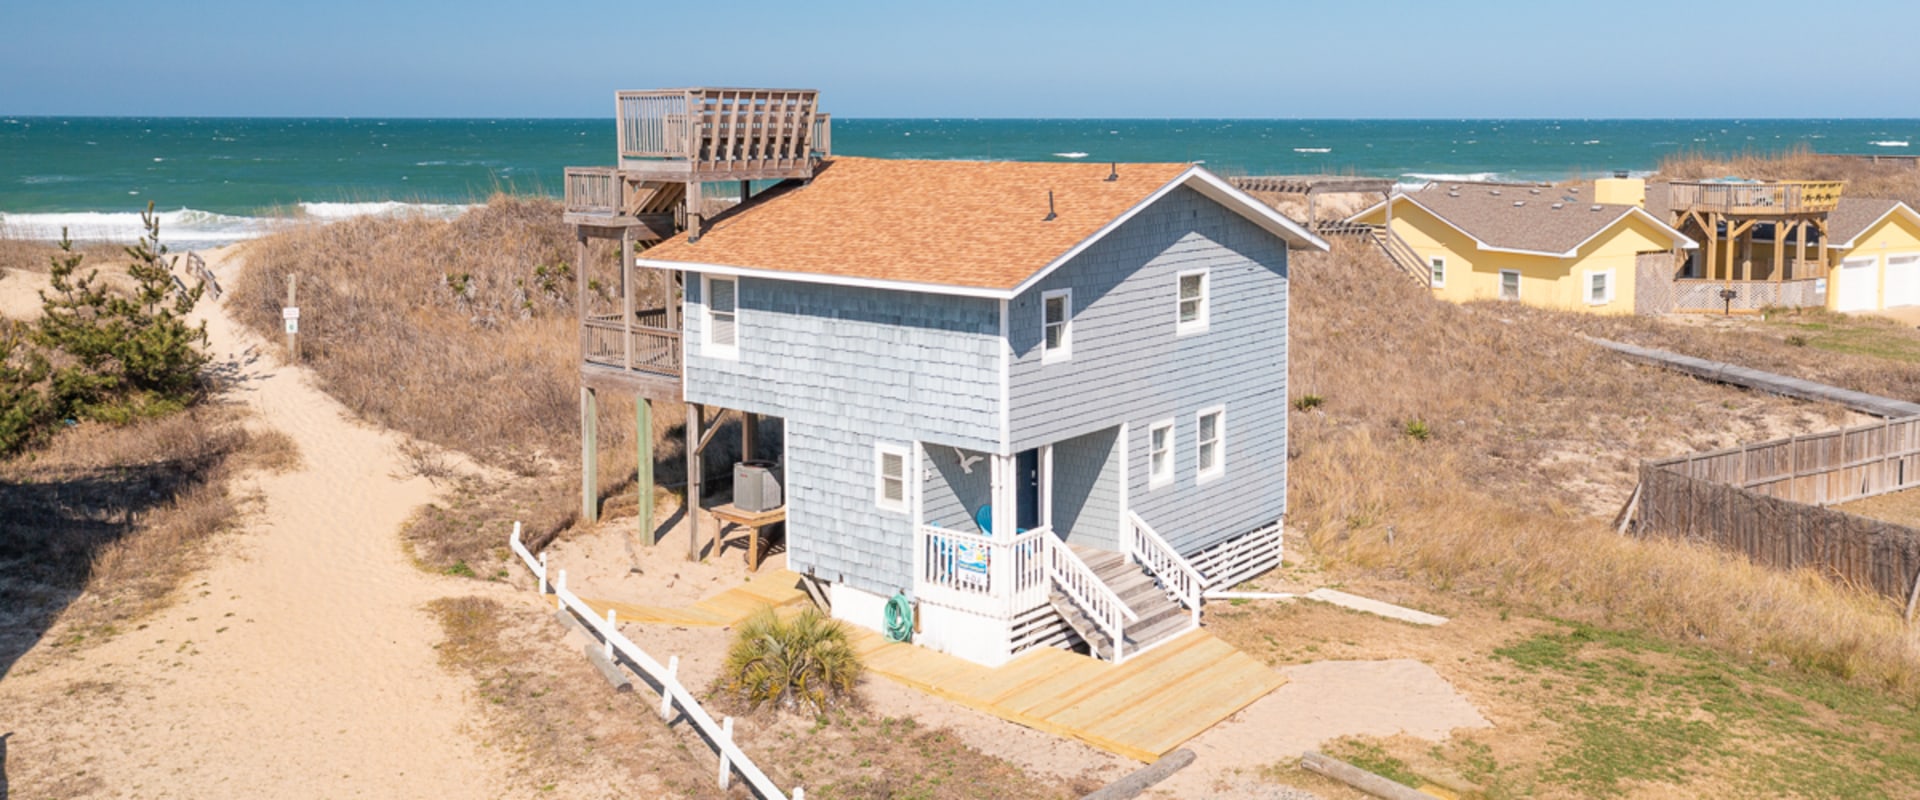 The Ultimate Guide To HVAC Service In Outer Banks: Air Conditioning Solutions